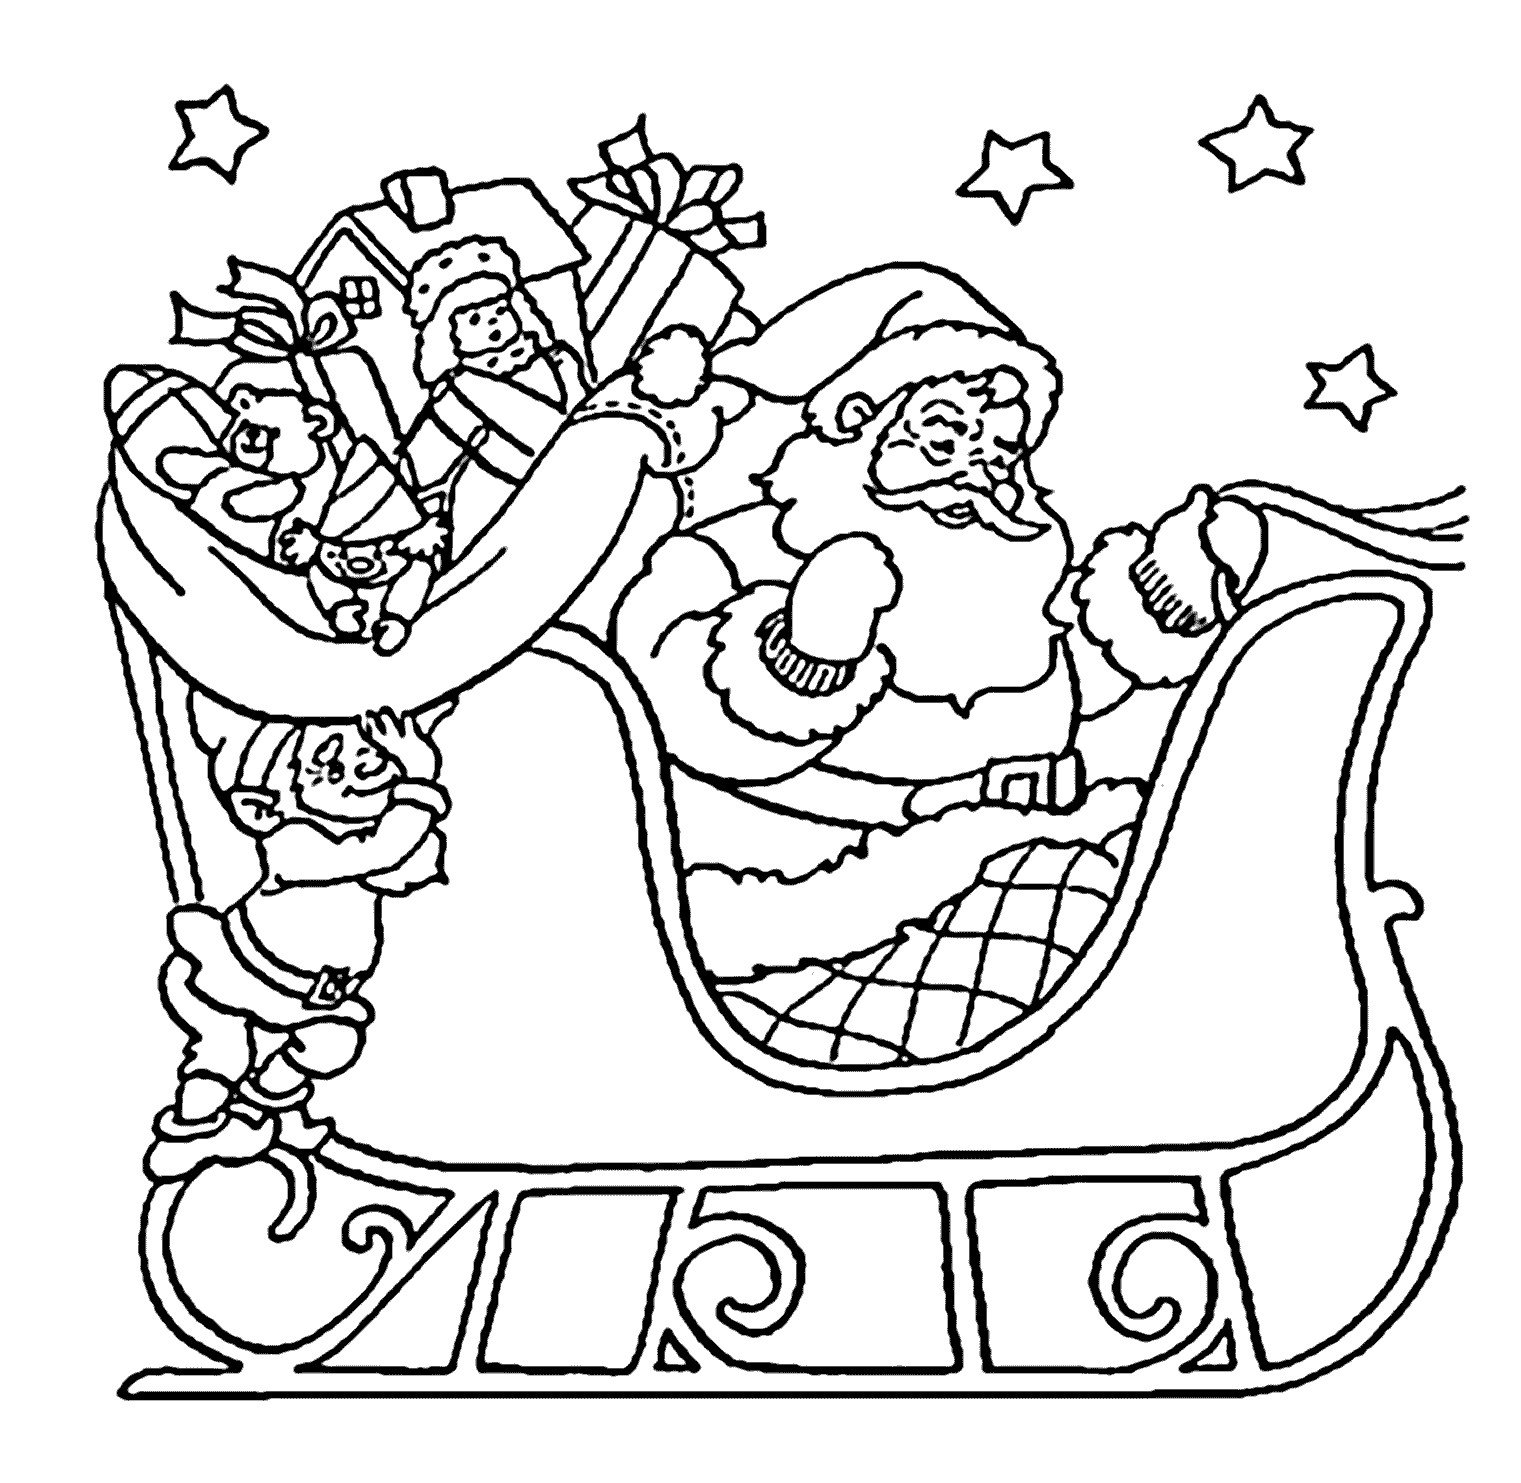 Santa Printable Coloring Pages
 Santa Coloring Pages Best Coloring Pages For Kids